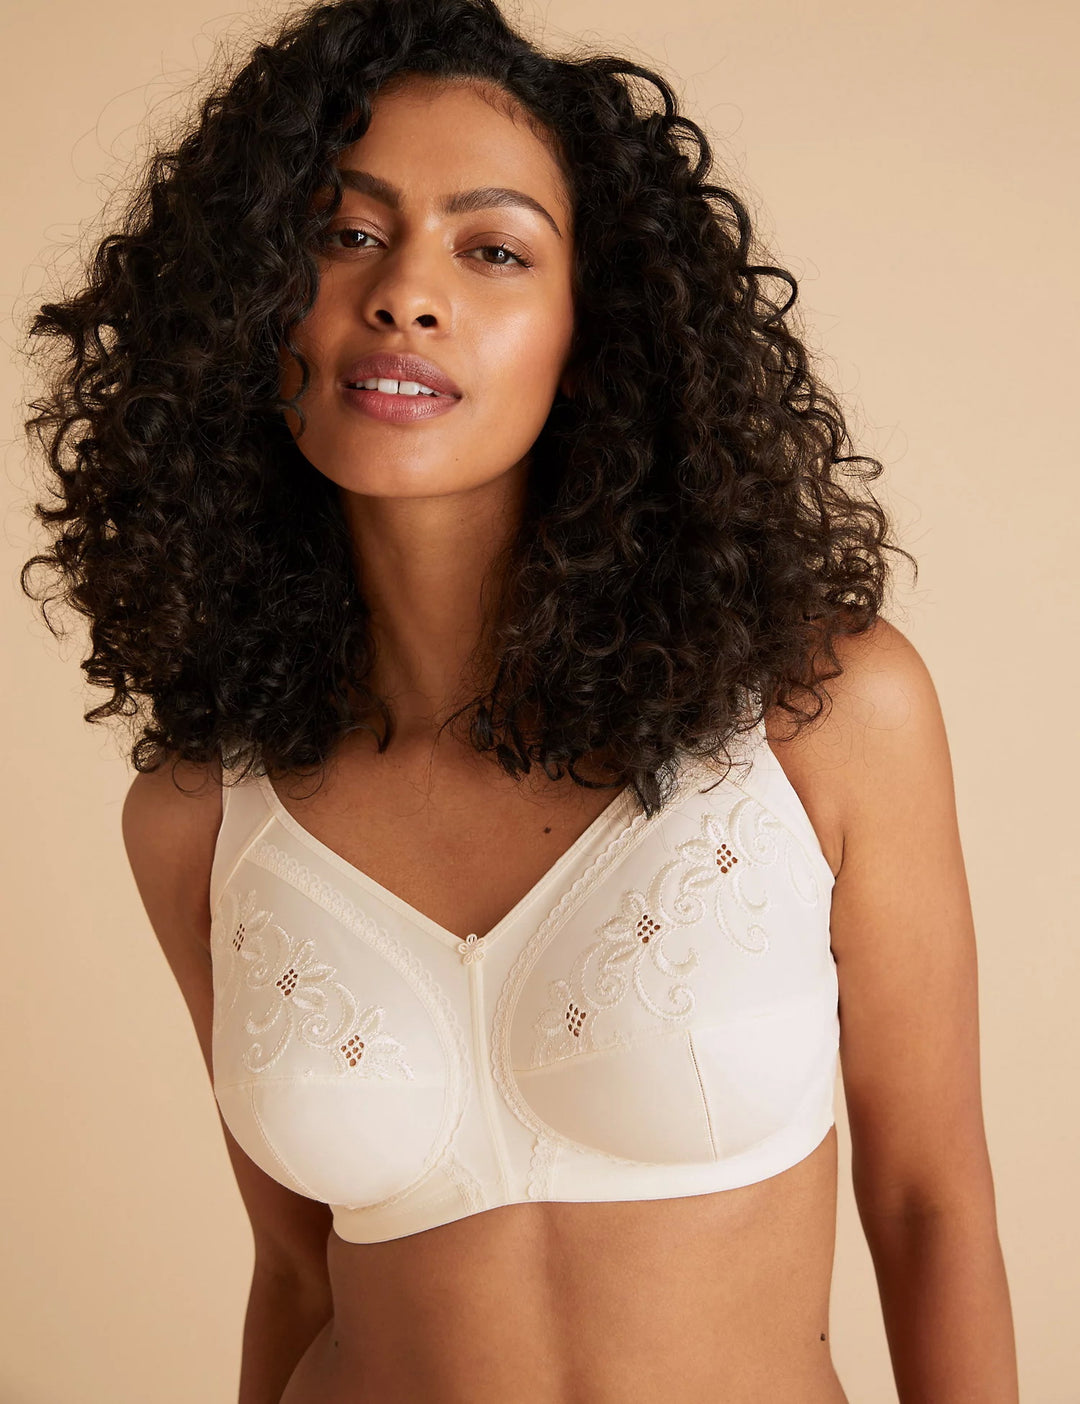 Marks & Spencer cream underwire padded bra size 40 F cup